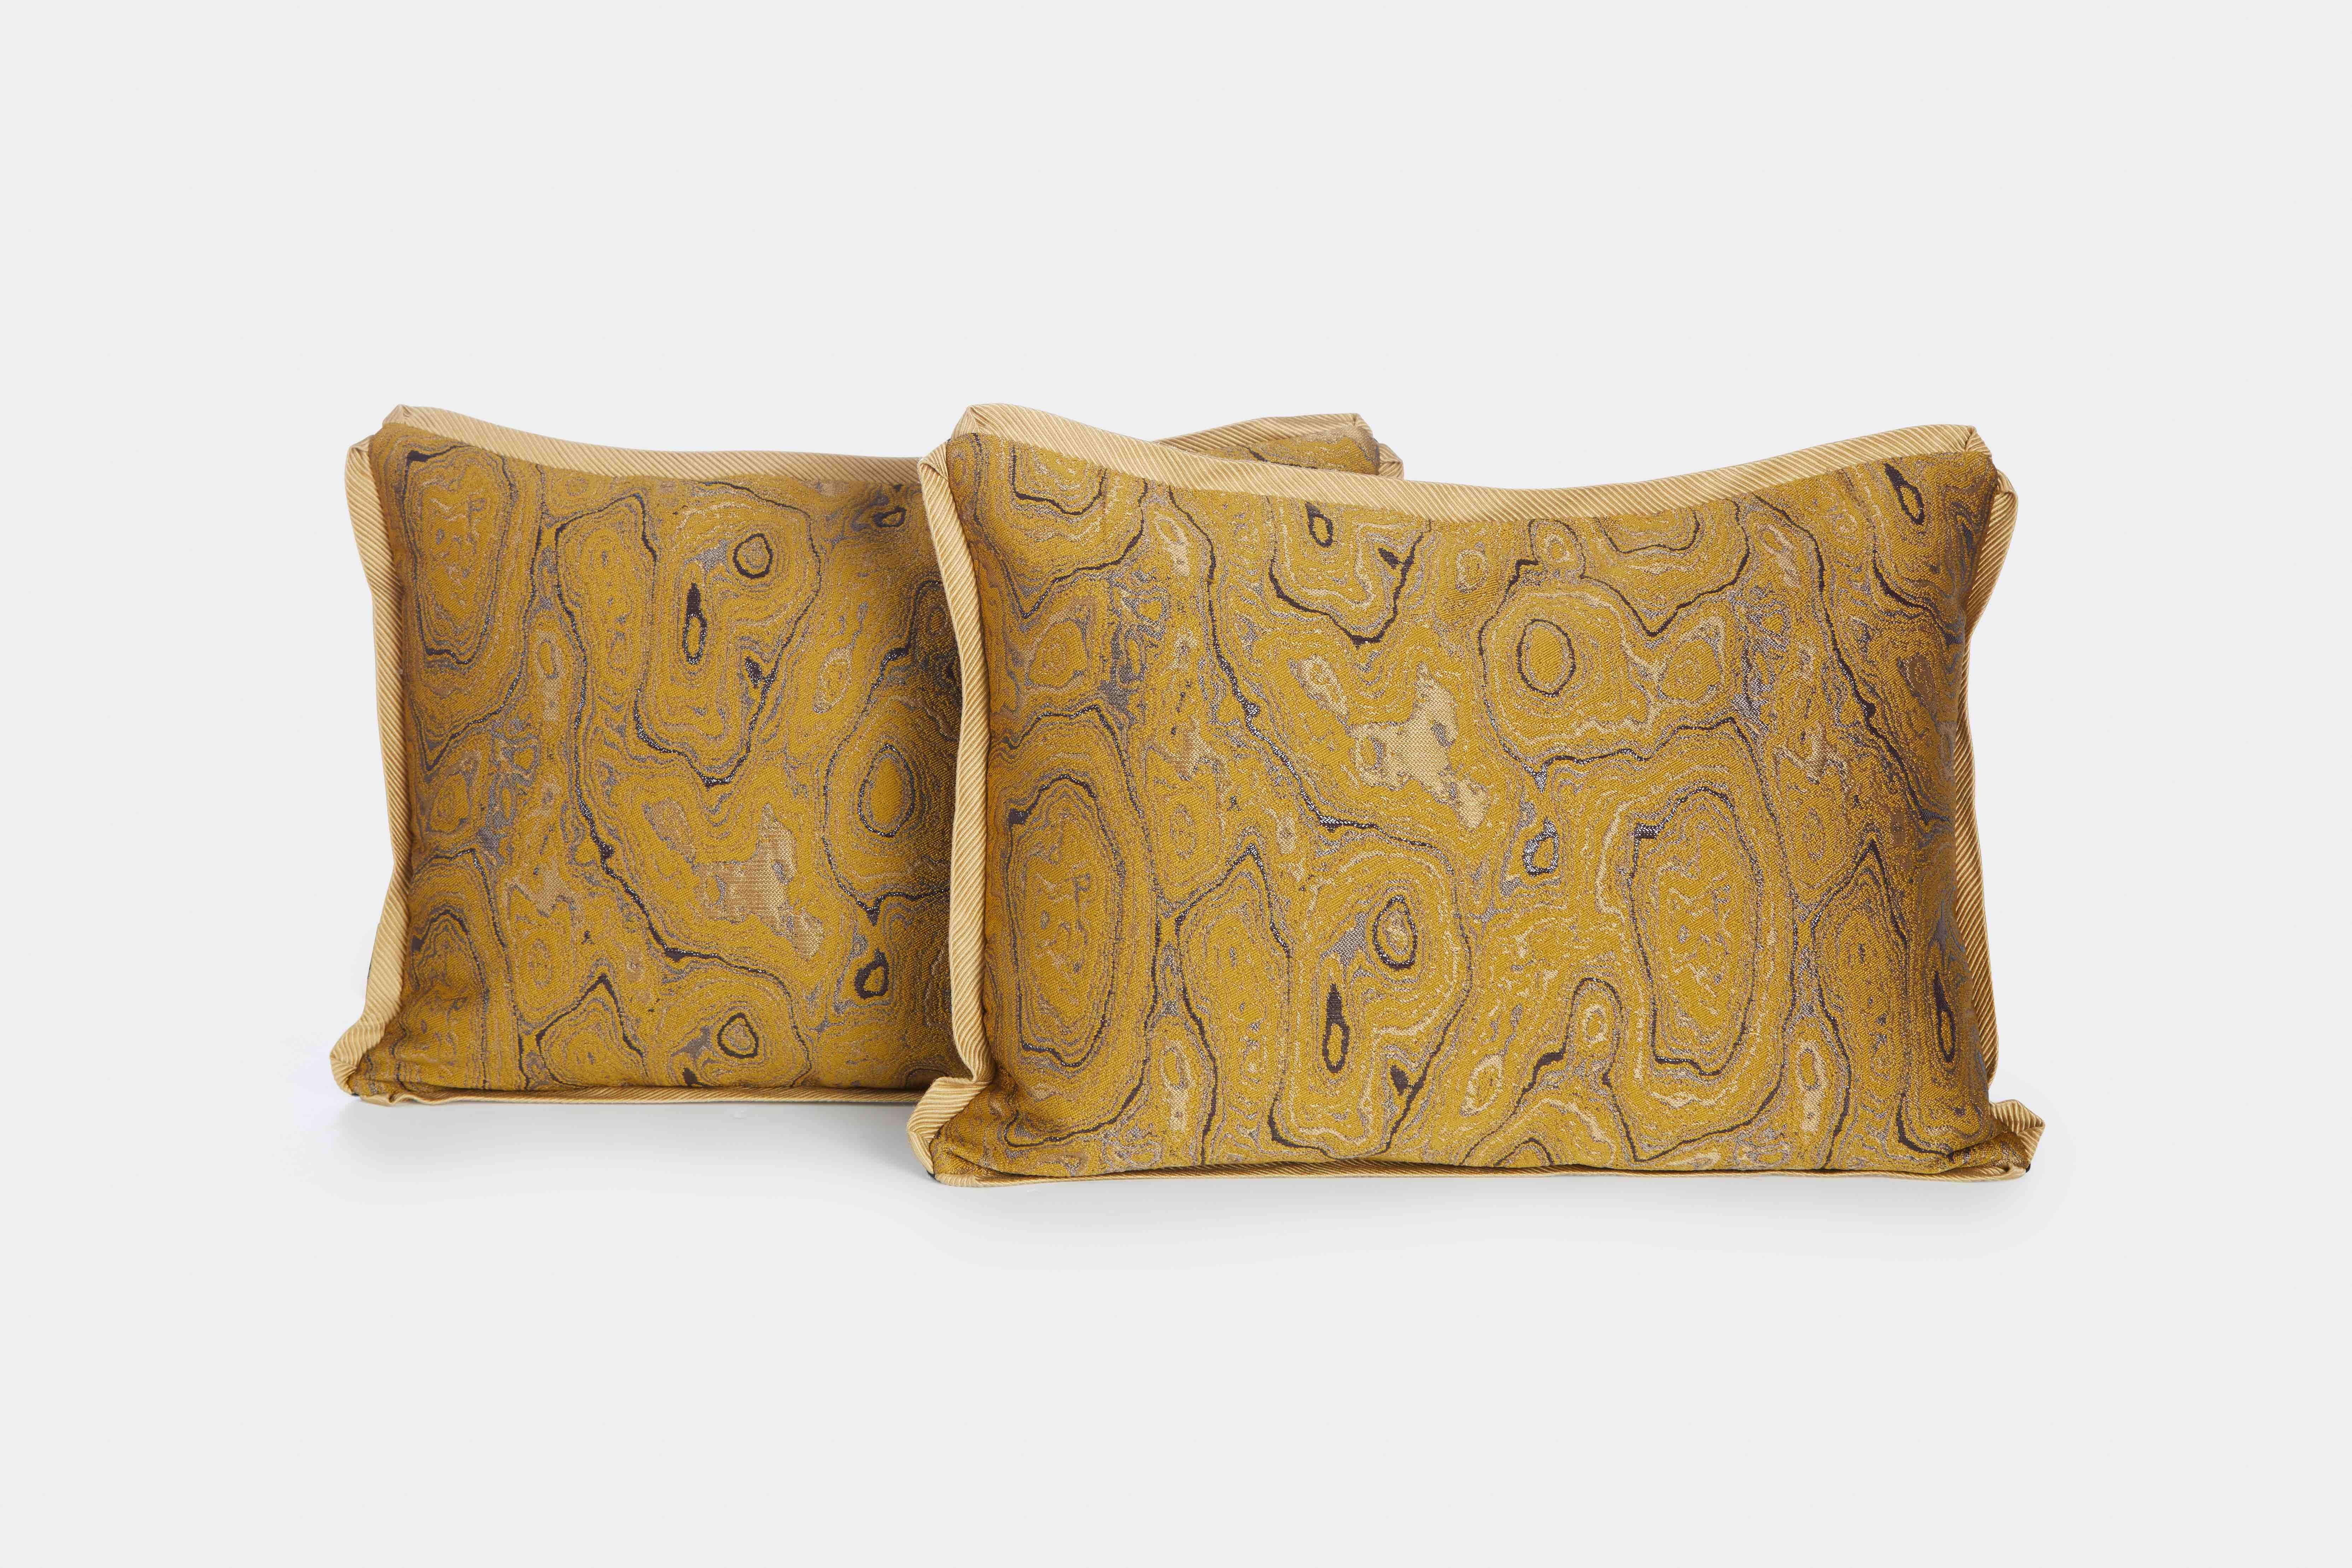 Contemporary Pair of Brocaded Silk with Metallic Thread Dries Van Noten Fabric Cushion For Sale